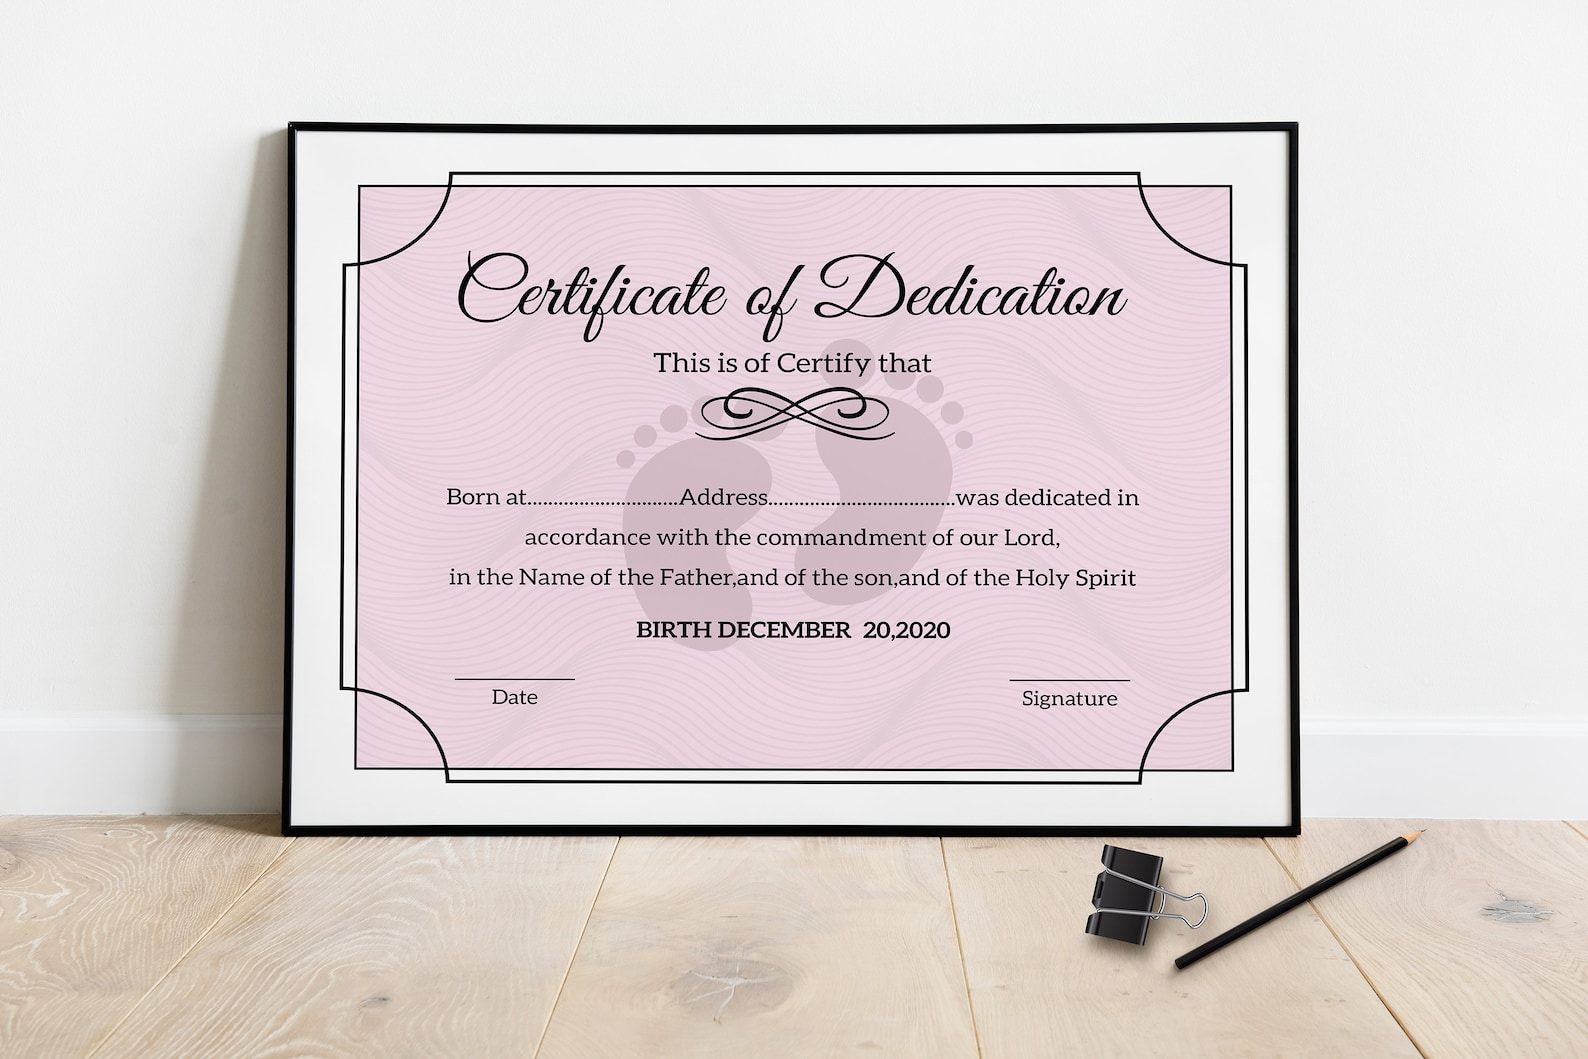 Baby Dedication Certificate Certificate Template Photoshop | Etsy throughout Amazing Baby Dedication Certificate Template